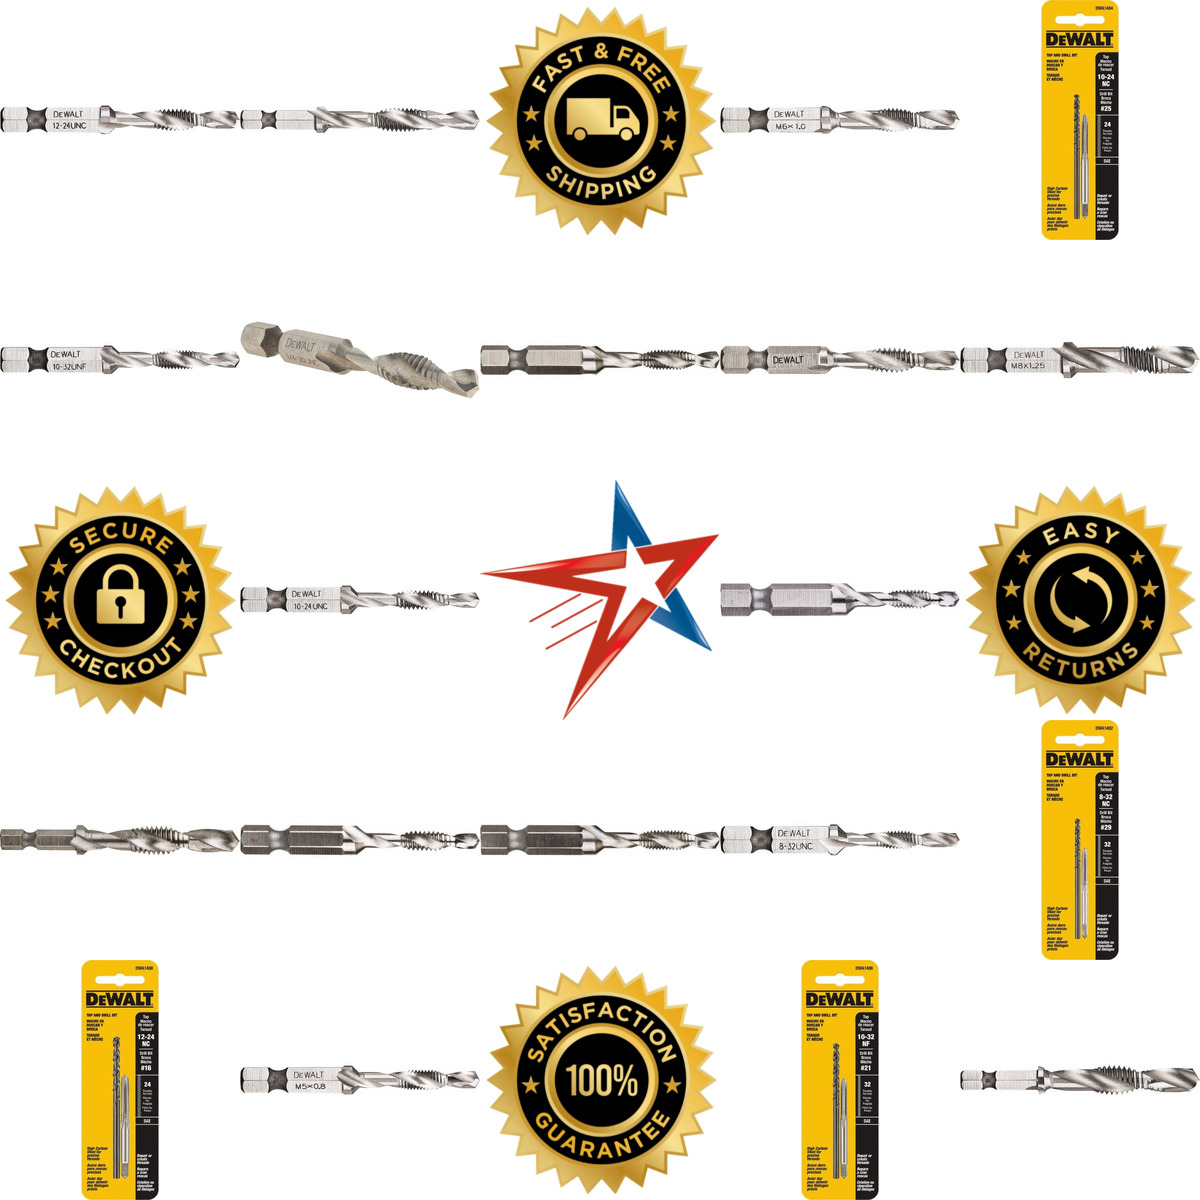 A selection of Dewalt products on GoVets